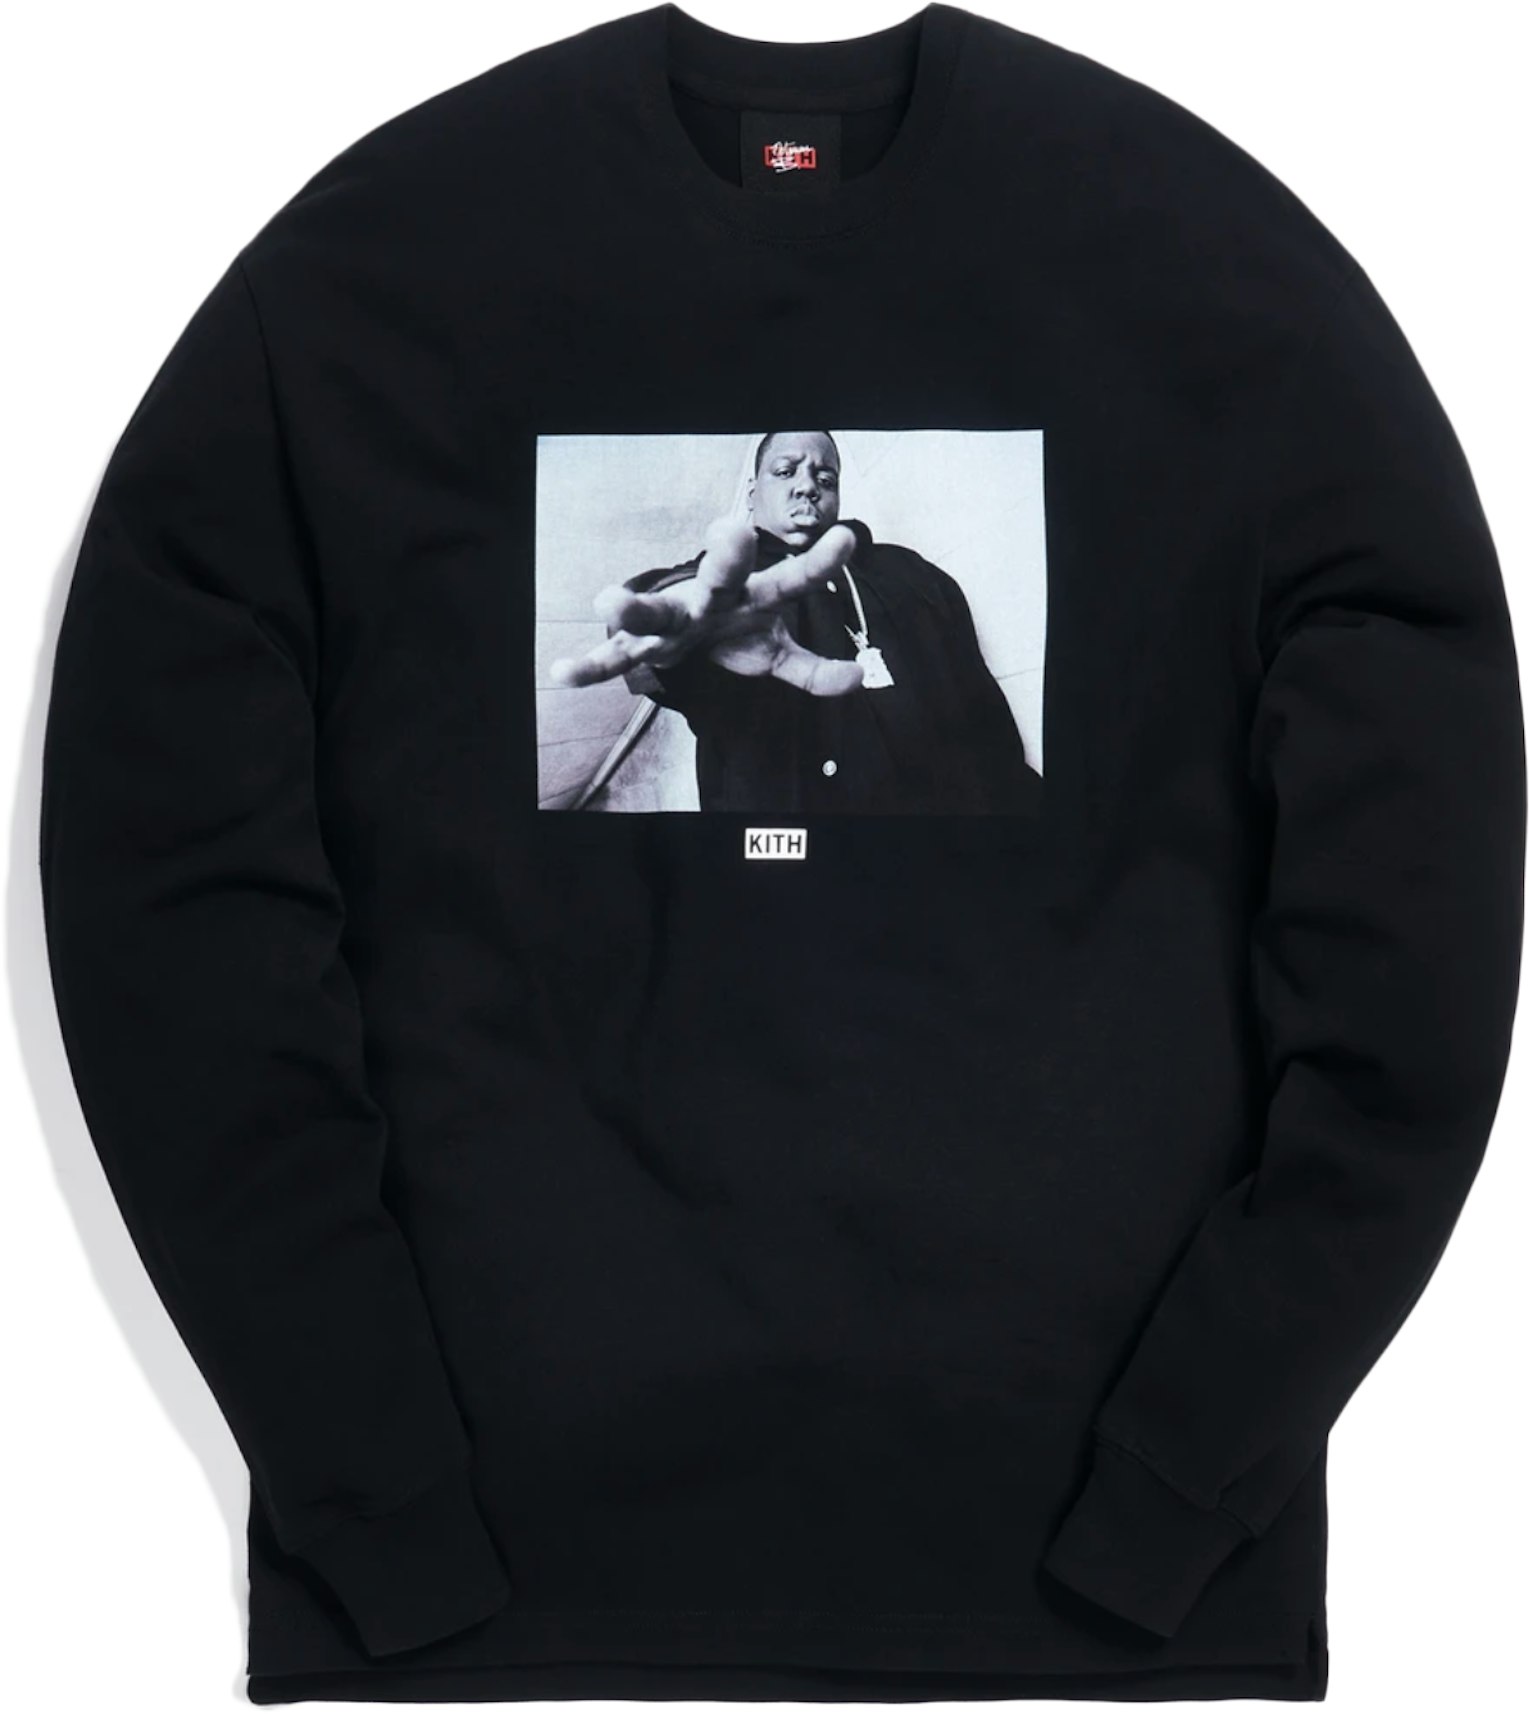 KITH BIGGIE GIMME THE LOOT L/S TEE BLACK-